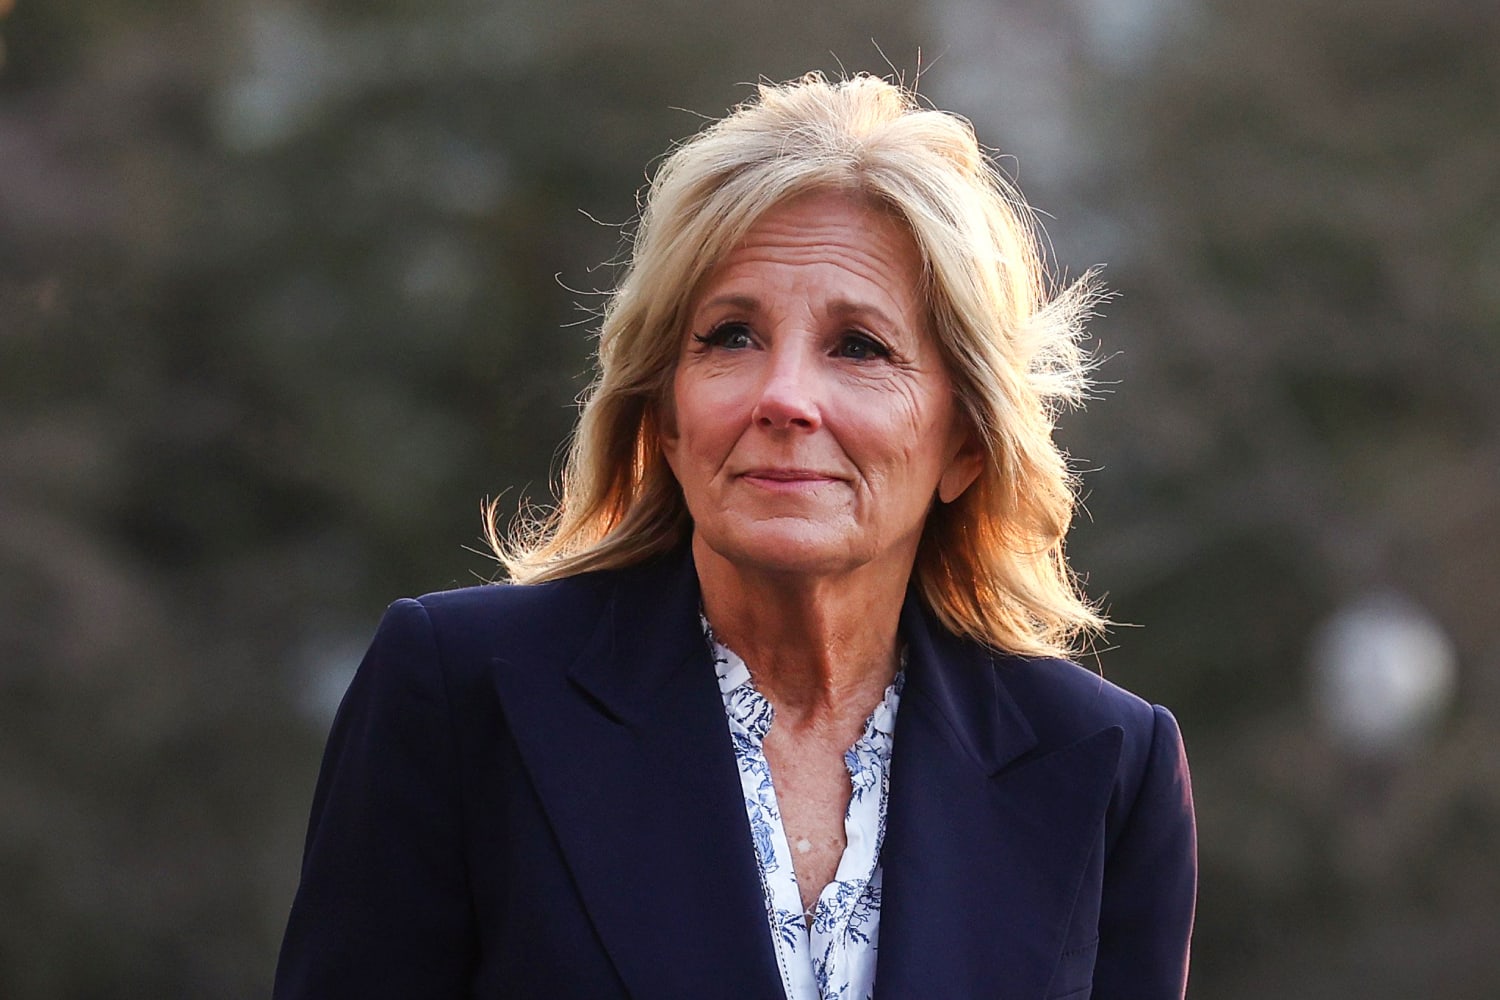 Lesion removed from Jill Biden's left eyelid was 'non-cancerous,' doctor says